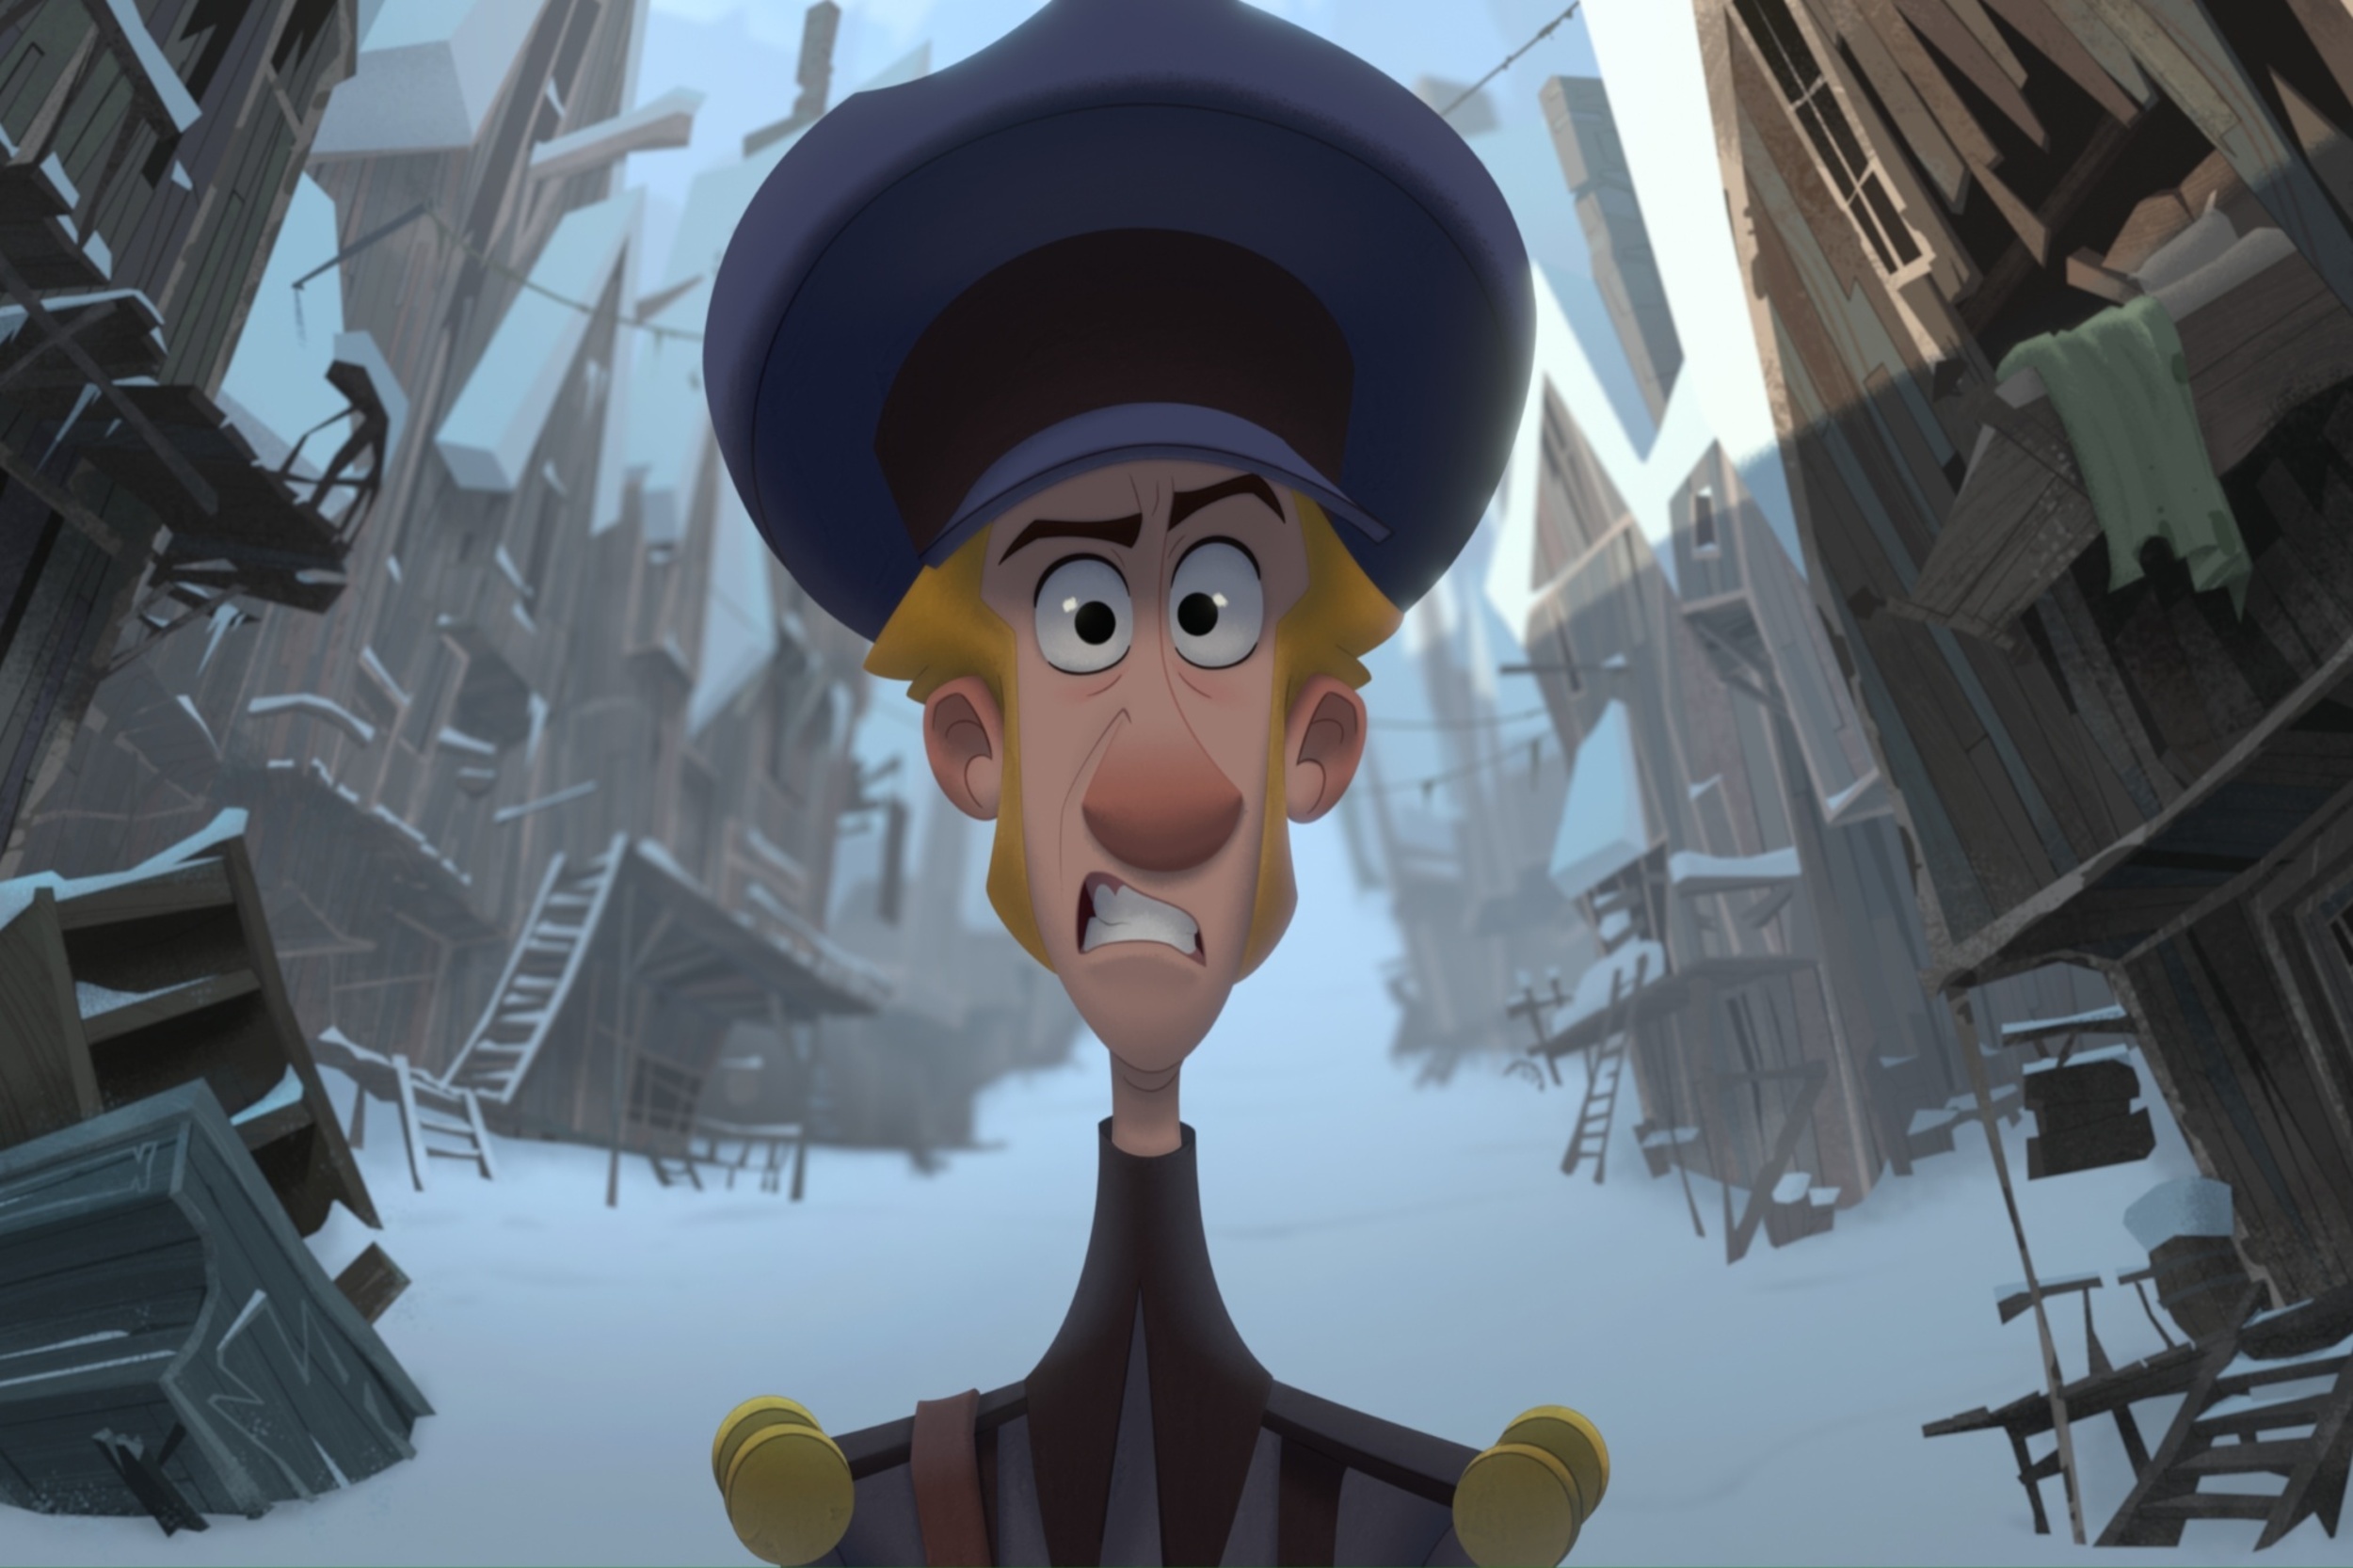 <p>While films like <em>Home Alone</em> and <em>Elf</em> are considered Christmas classics, <em>Klaus</em> should be considered a modern Christmas classic. The animated film follows a mail carrier who befriends toymaker Klaus. An origin story of sorts for Santa, the film focuses on the power of simple acts of kindness and is full of heart and humor. As Netflix’s first-ever animated release, the artistry and craftsmanship displayed through hand-drawn animation are all the more impressive. </p><p><a href='https://www.msn.com/en-us/community/channel/vid-cj9pqbr0vn9in2b6ddcd8sfgpfq6x6utp44fssrv6mc2gtybw0us'>Follow us on MSN to see more of our exclusive entertainment content.</a></p>